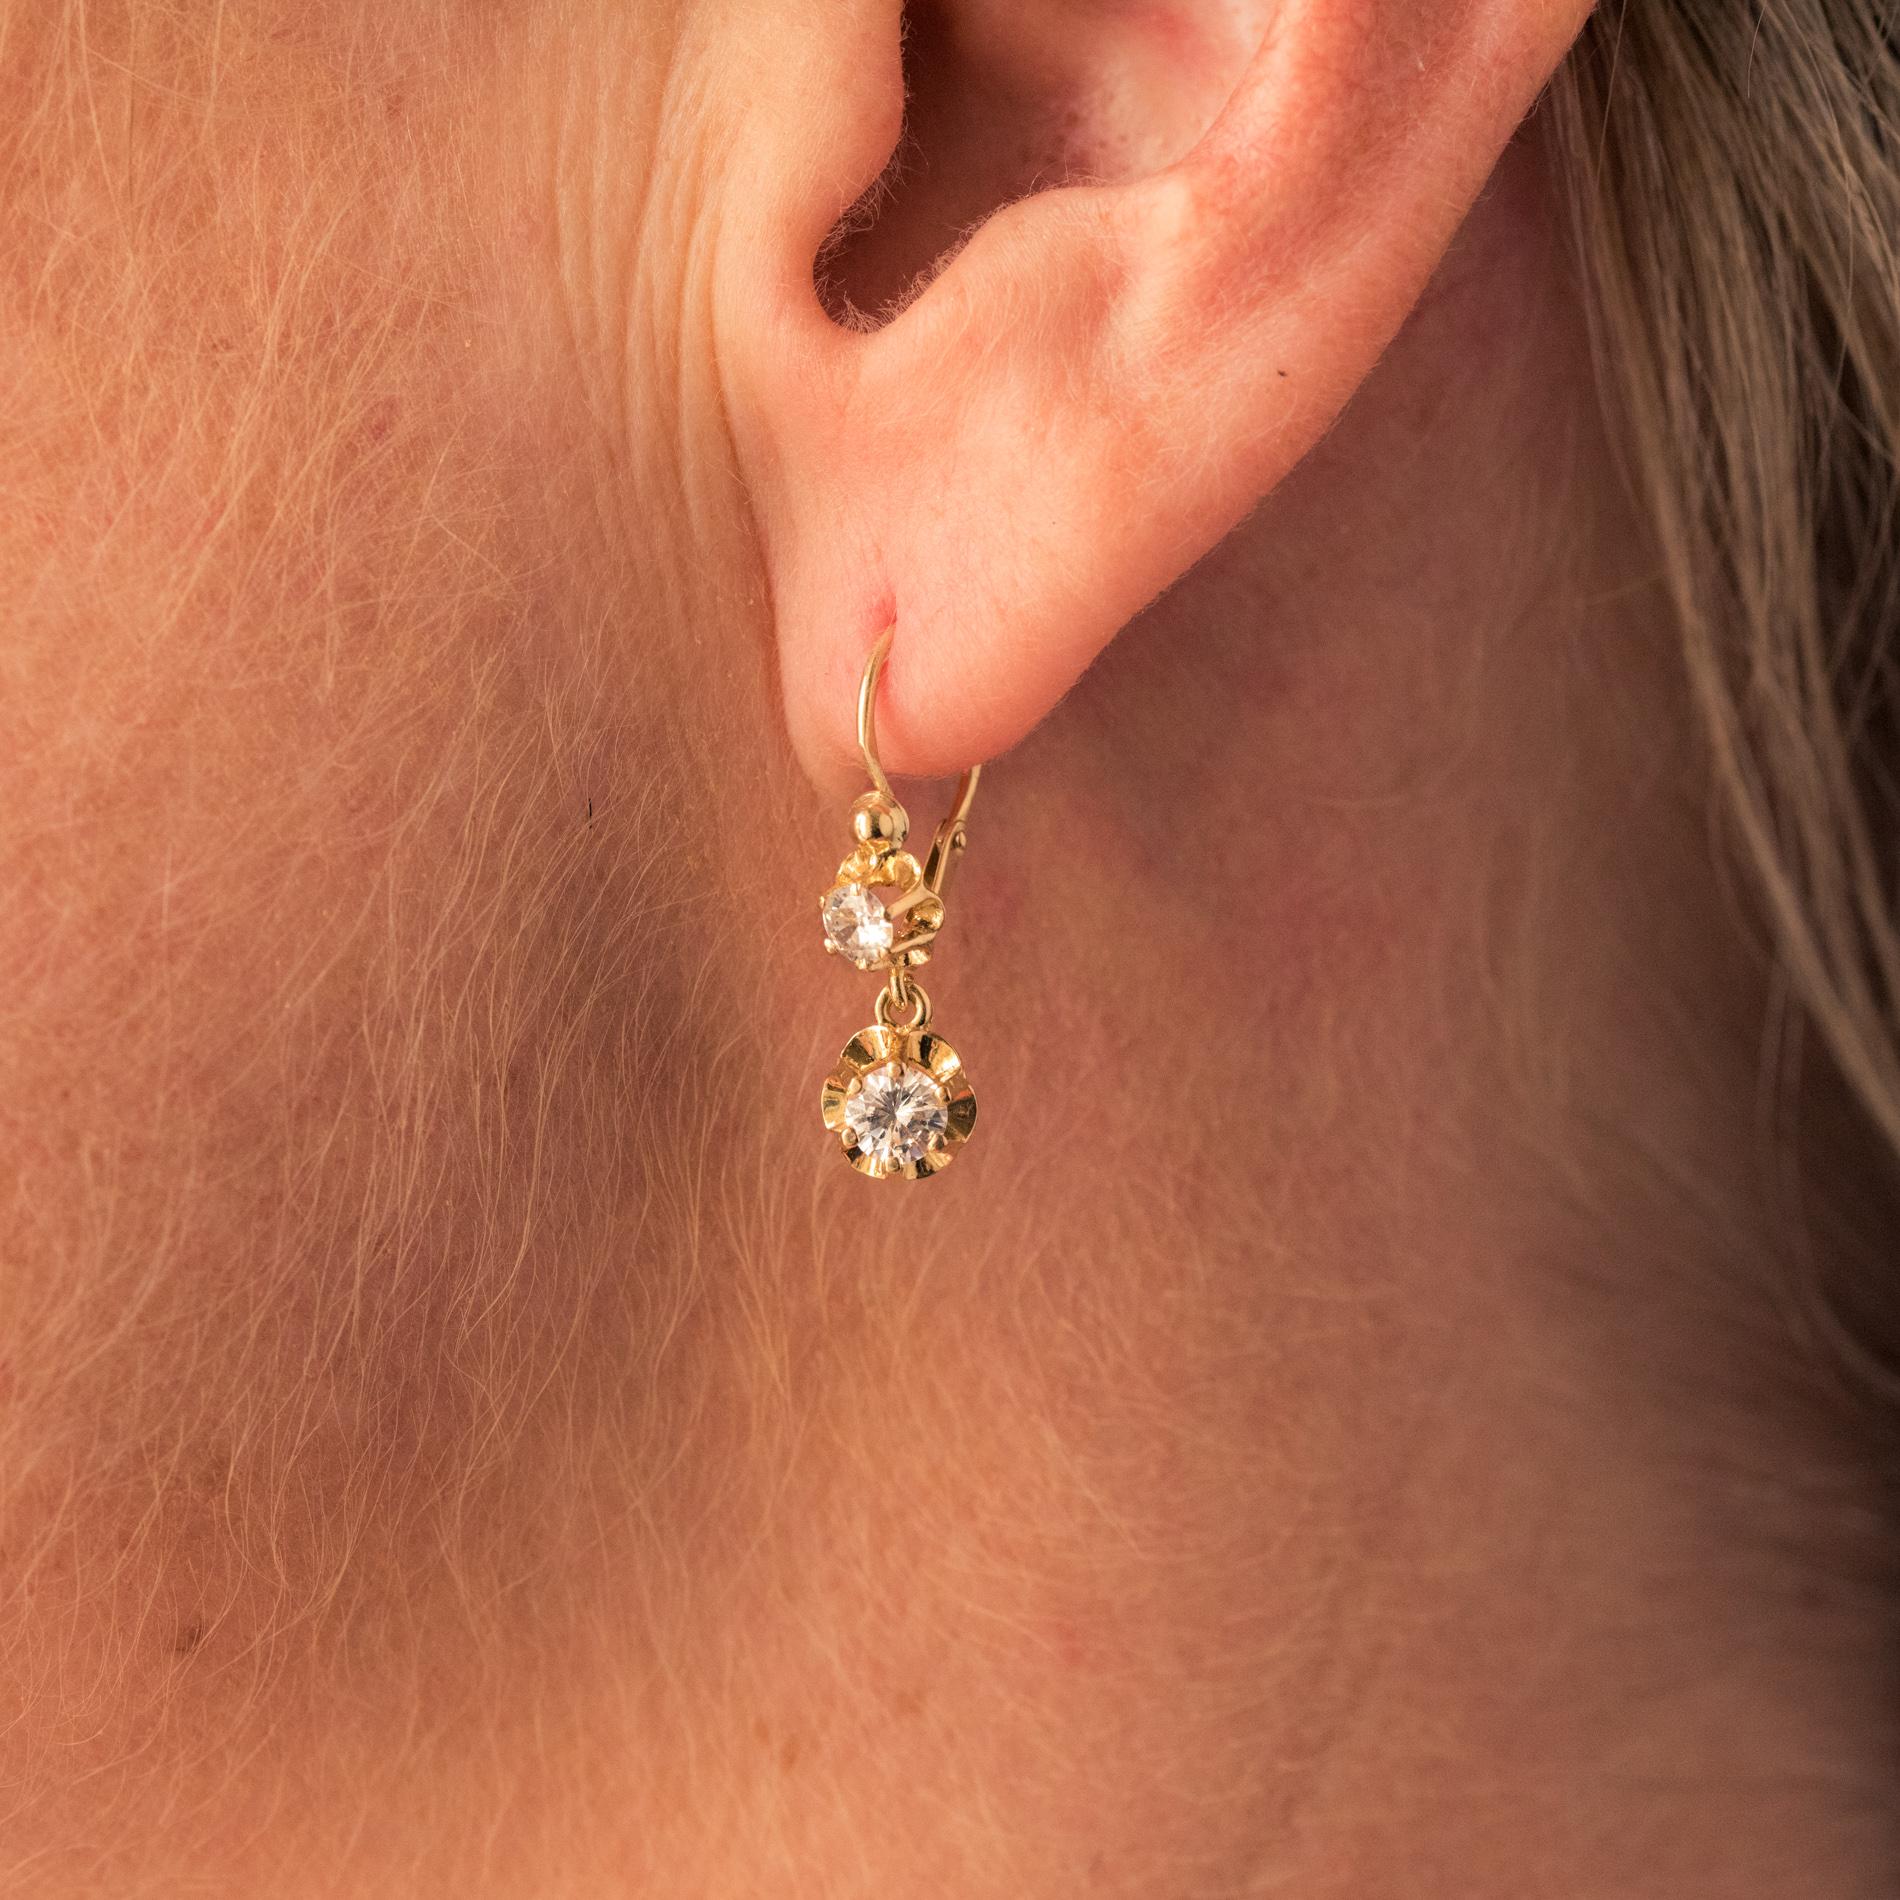 Earrings in 18 karat yellow gold.
Magnificent antique earrings, they are set with claws of a modern brilliant-cut diamond which holds in the pendulum a modern brilliant-cut diamond of larger size, also set with claws. The clasp is from the